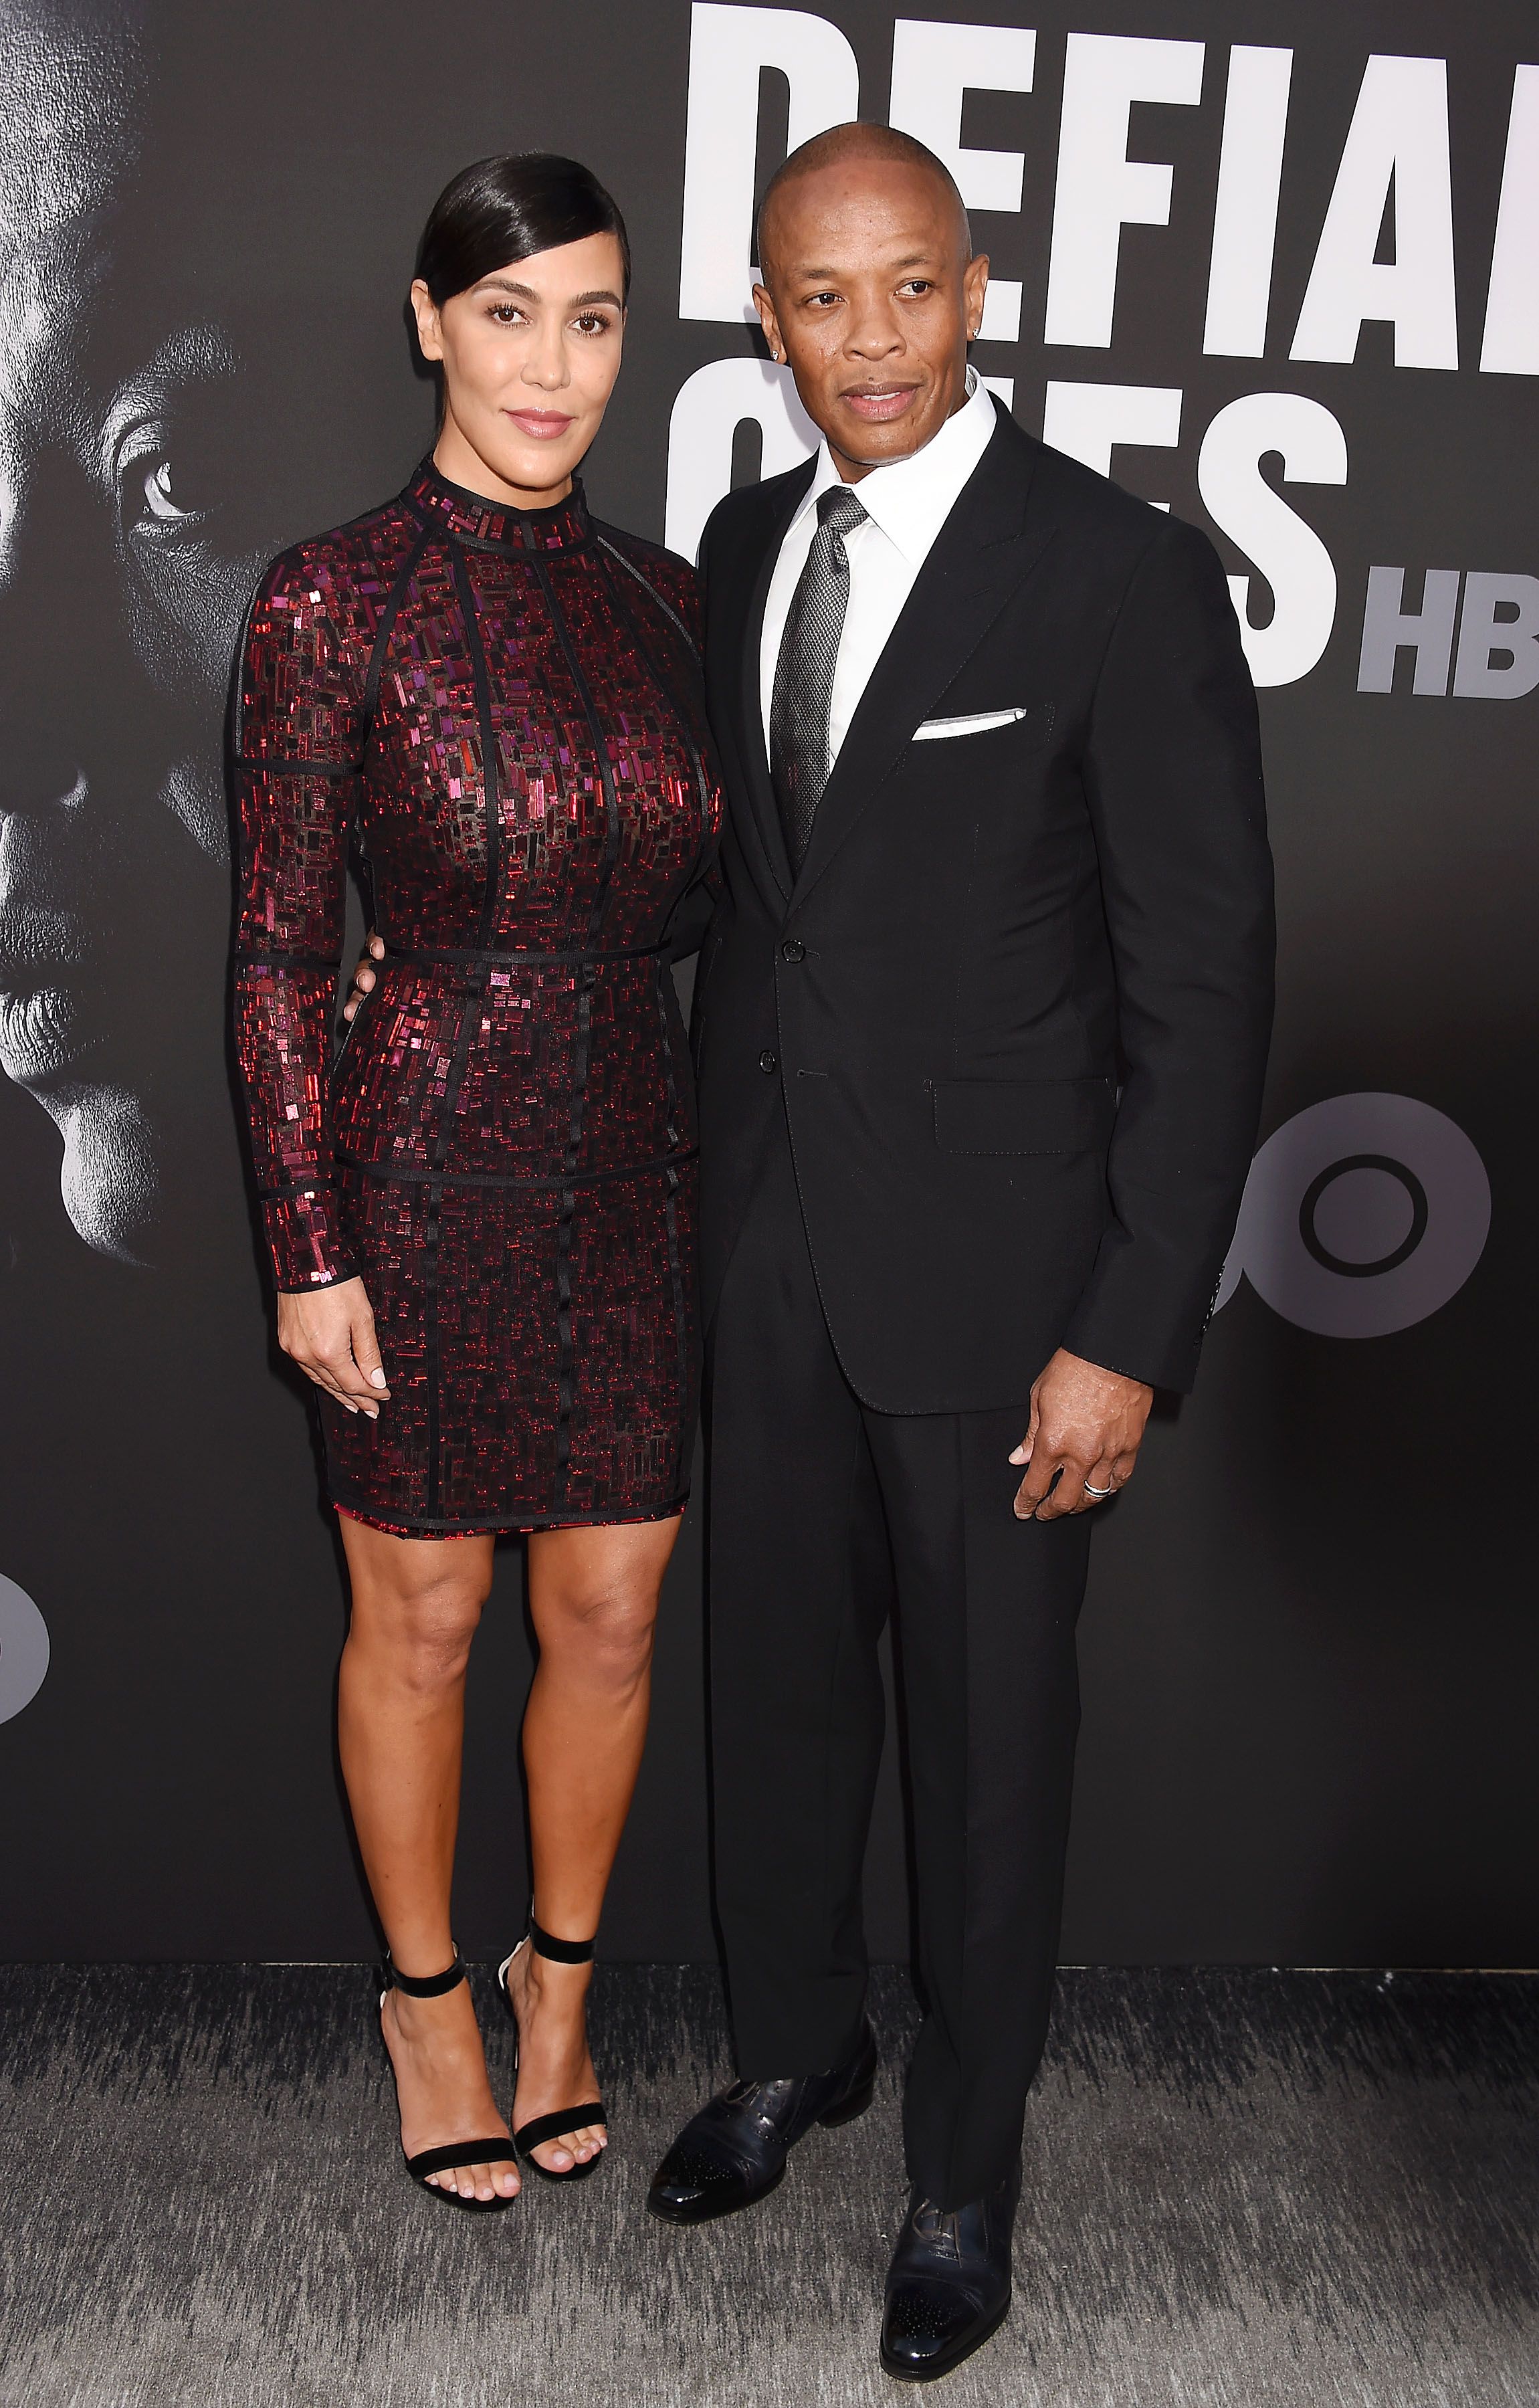 Nicole Young and Dr. Dre at the premiere of HBO's "The Defiant Ones" on June 22, 2017 | Photo: Getty Images